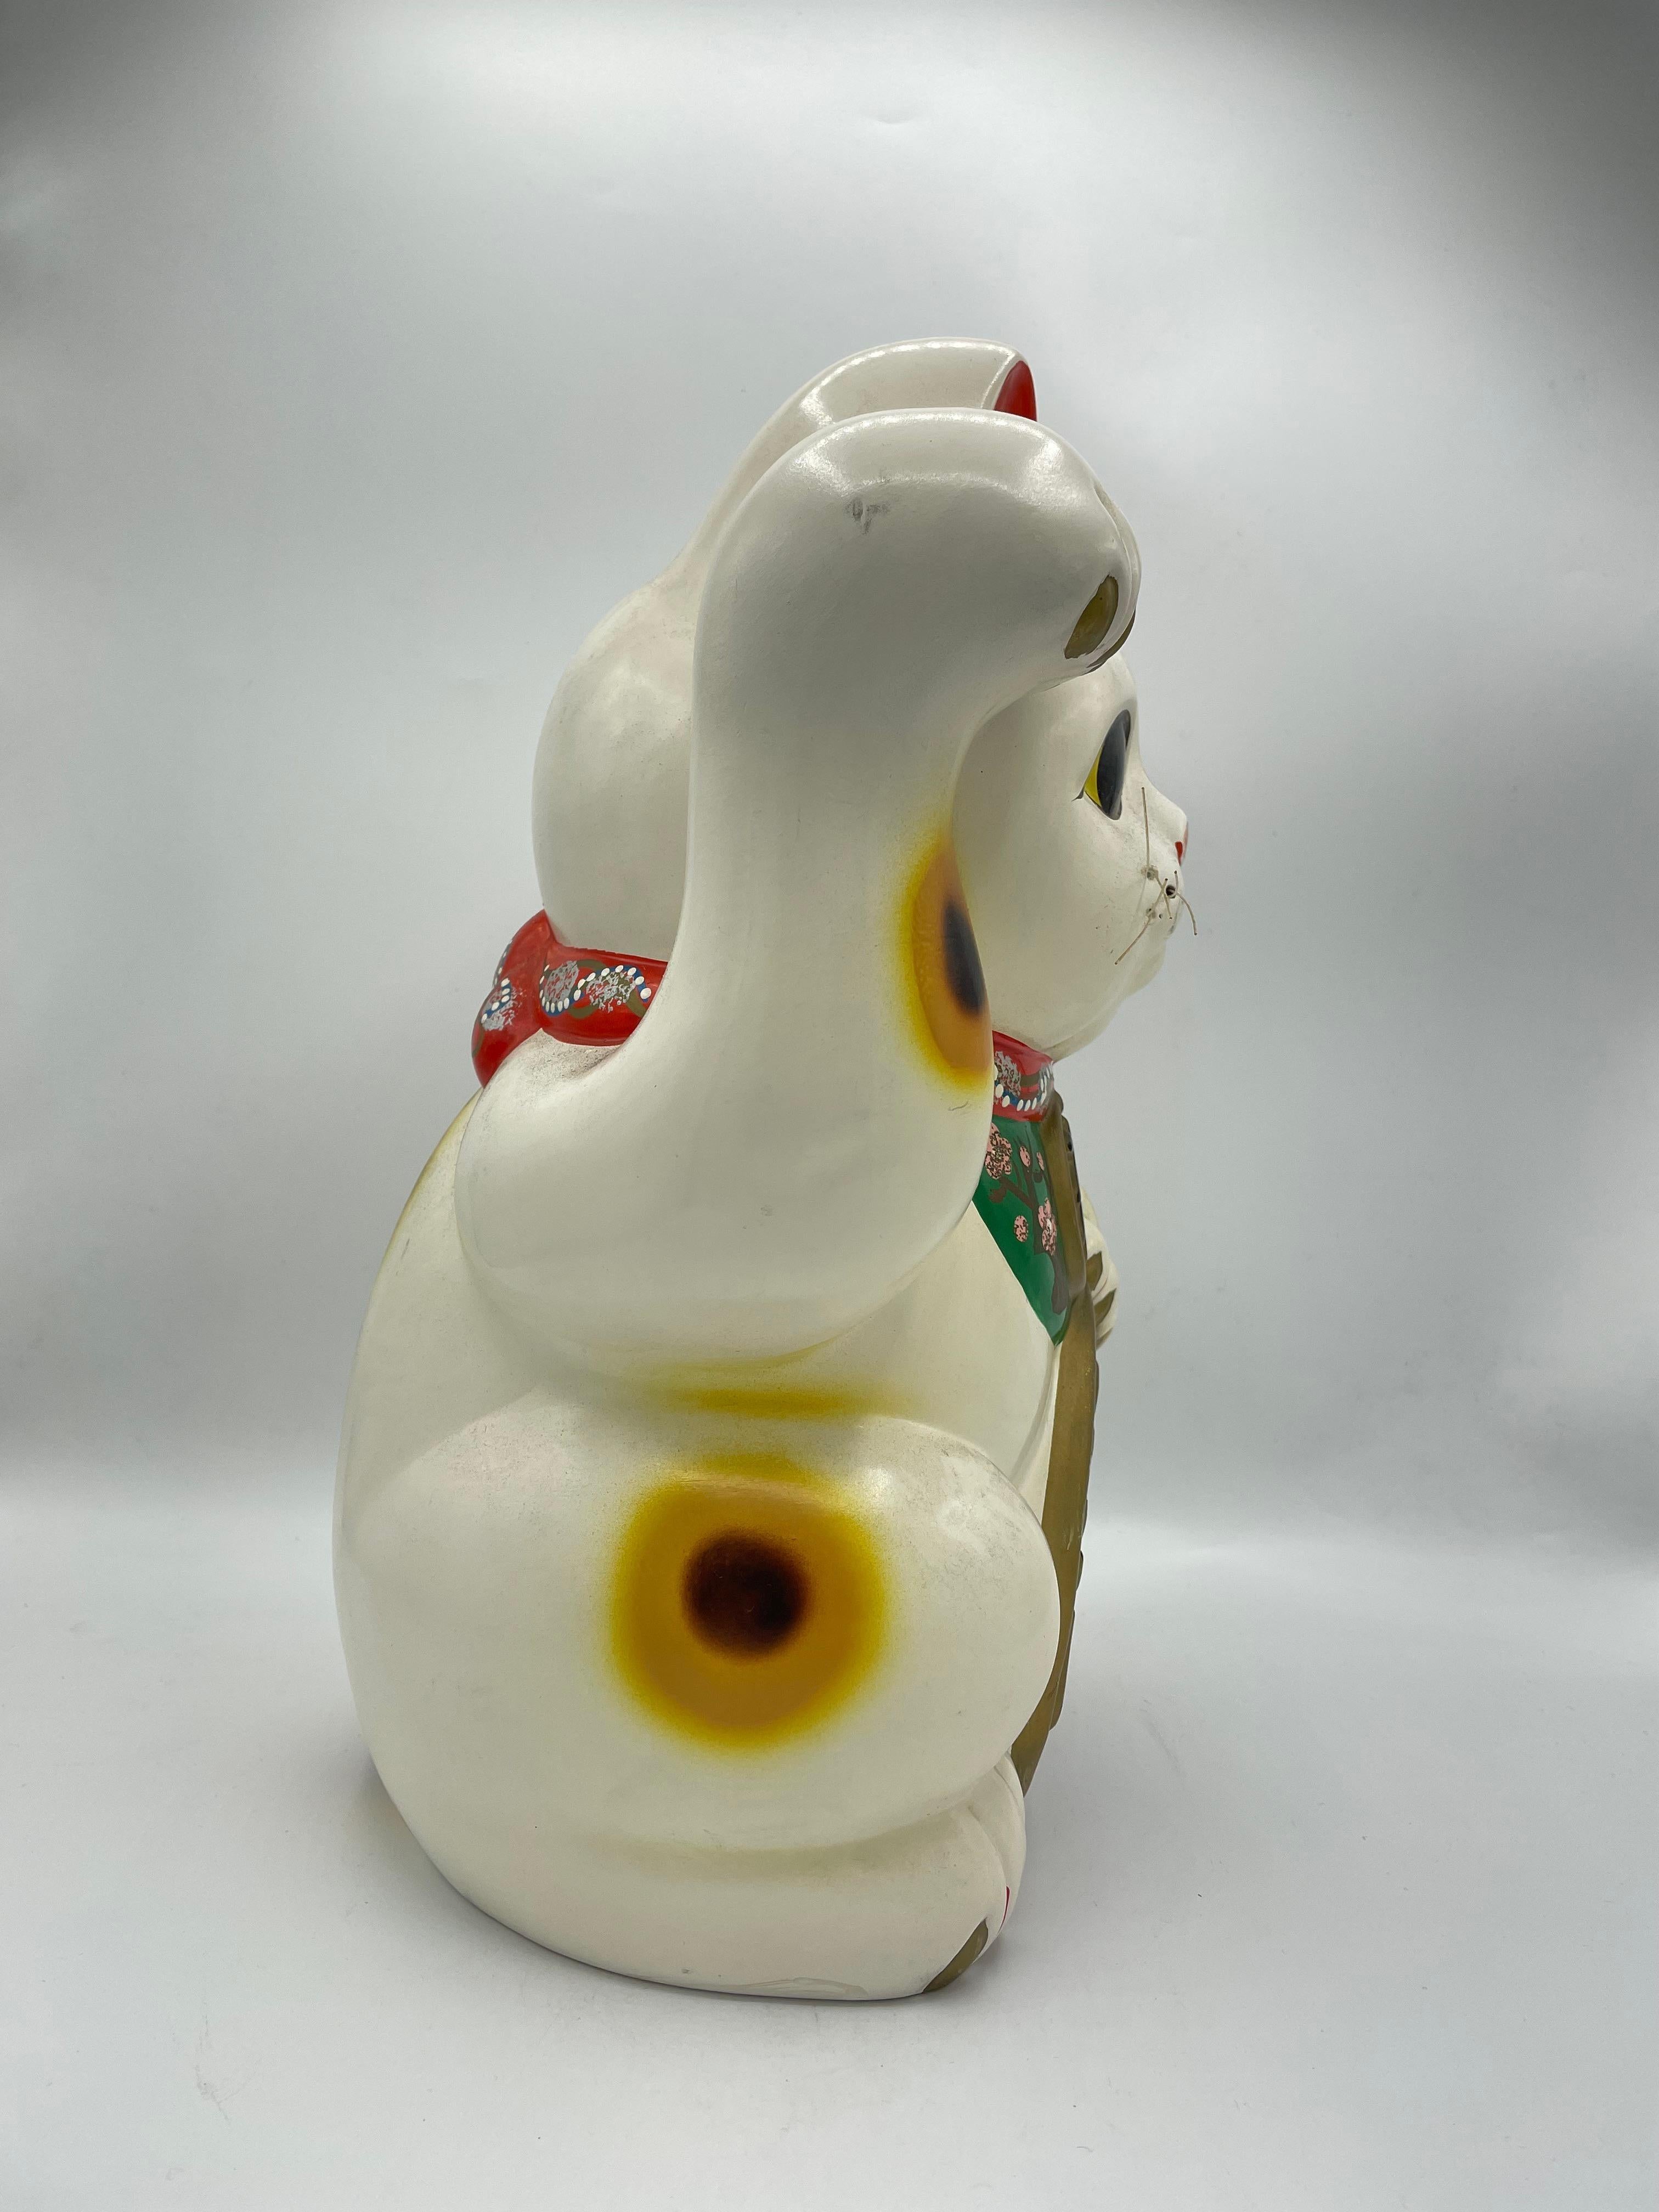 This is a vintage piggy bank of manekineko cat. It is made with Pottery and it was made around 1960s in Showa era.

The maneki-neko is a common Japanese figurine which is often believed to bring good luck to the owner. In modern times, they are